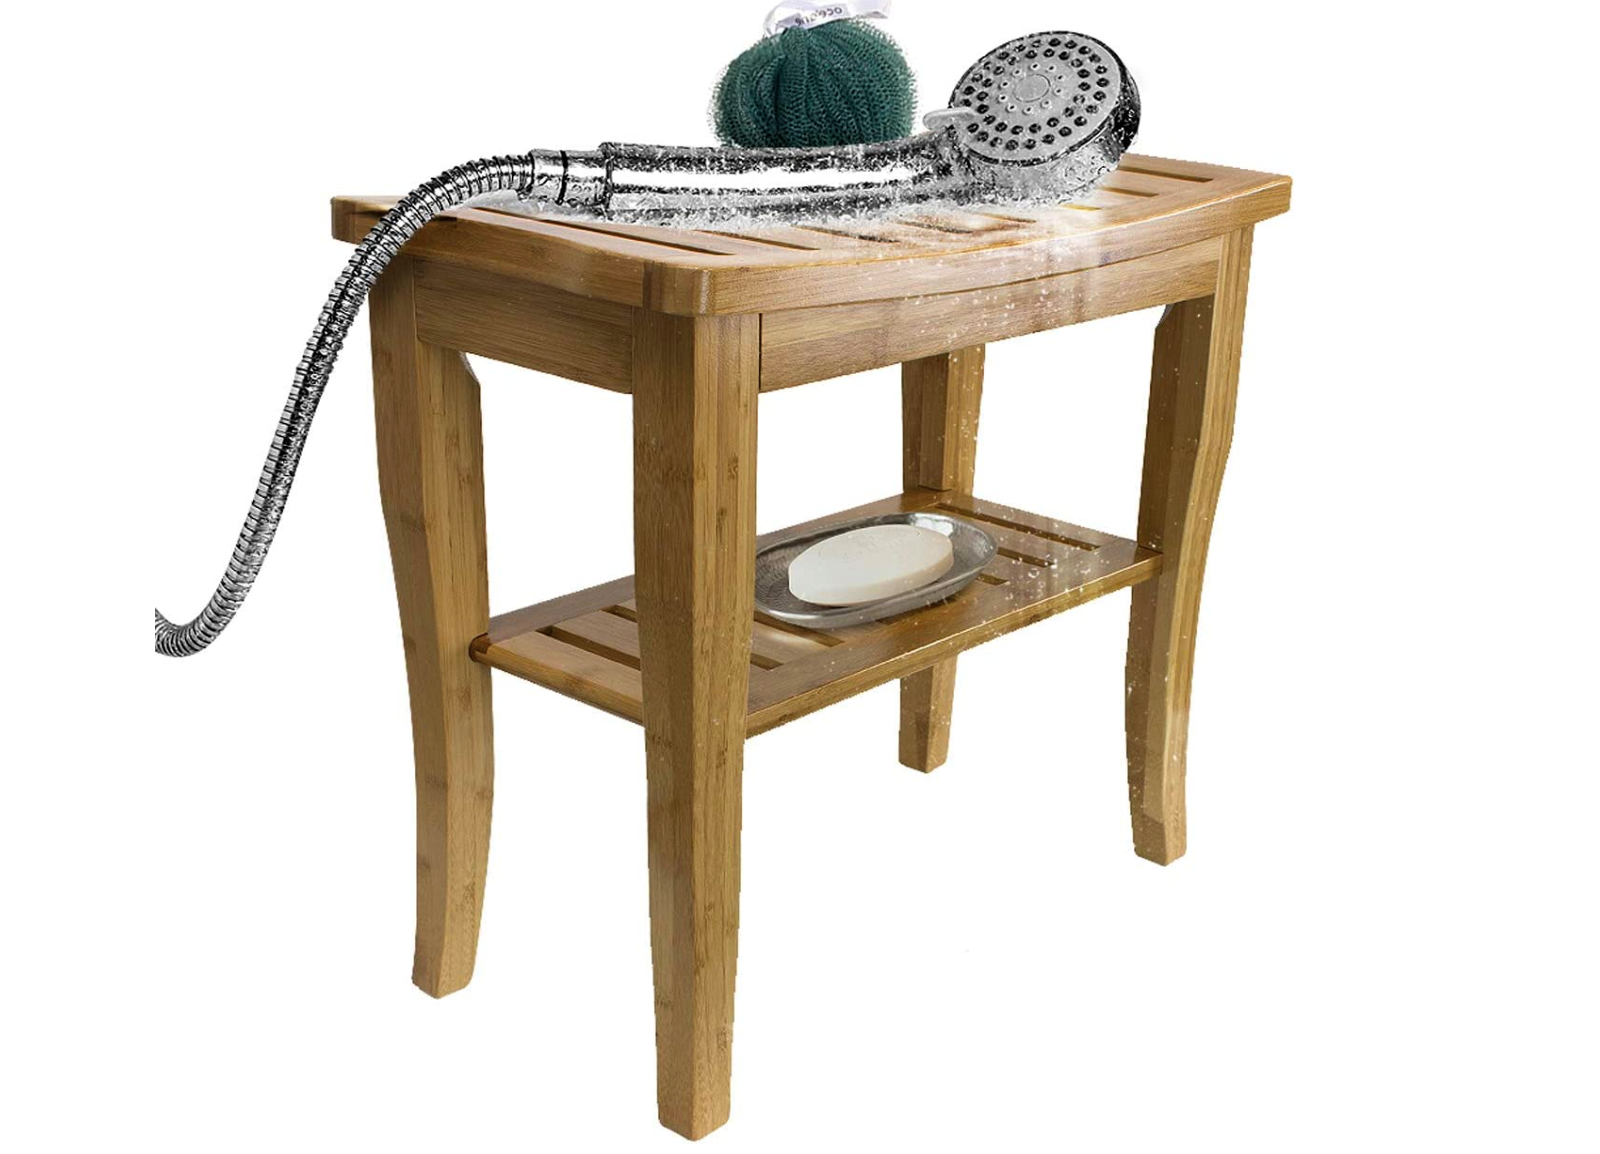 https://www.oldhouseonline.com/oho-html/review/wp-content/uploads/2023/04/Sorbus-Shower-Bench.png